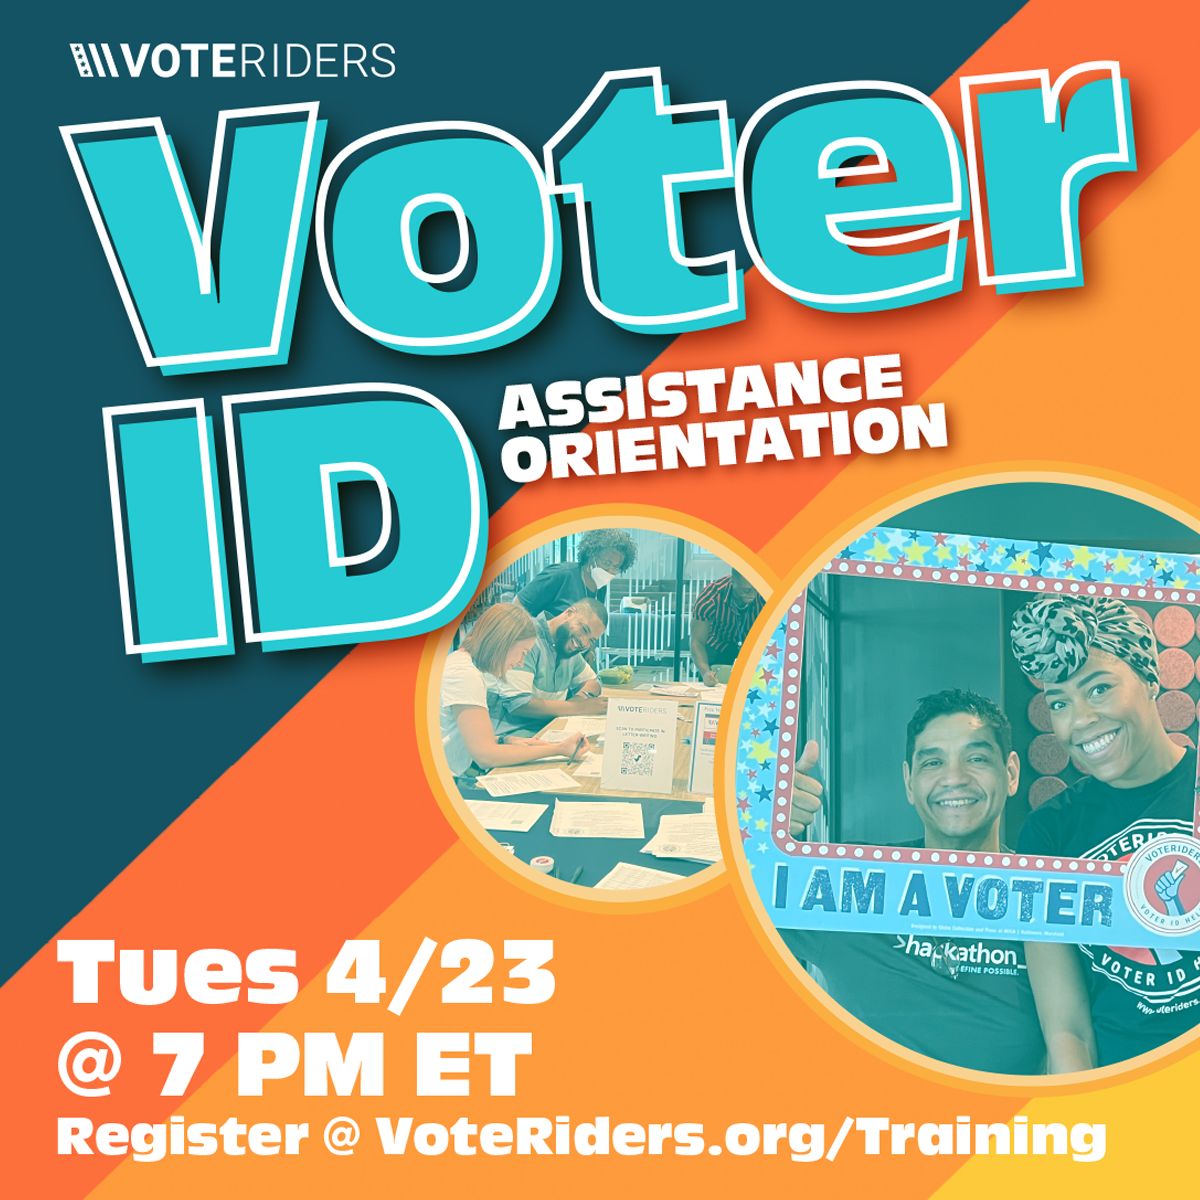 ⚡🗳️⚡Voter ID Month of Action is not over yet! Tomorrow, attend our Voter ID Assistance Orientation & learn how you can help folks secure the ID they need to cast a ballot that counts! Take action to protect the freedom to vote. Sign up now!👇 mobilize.us/voteriders/eve…